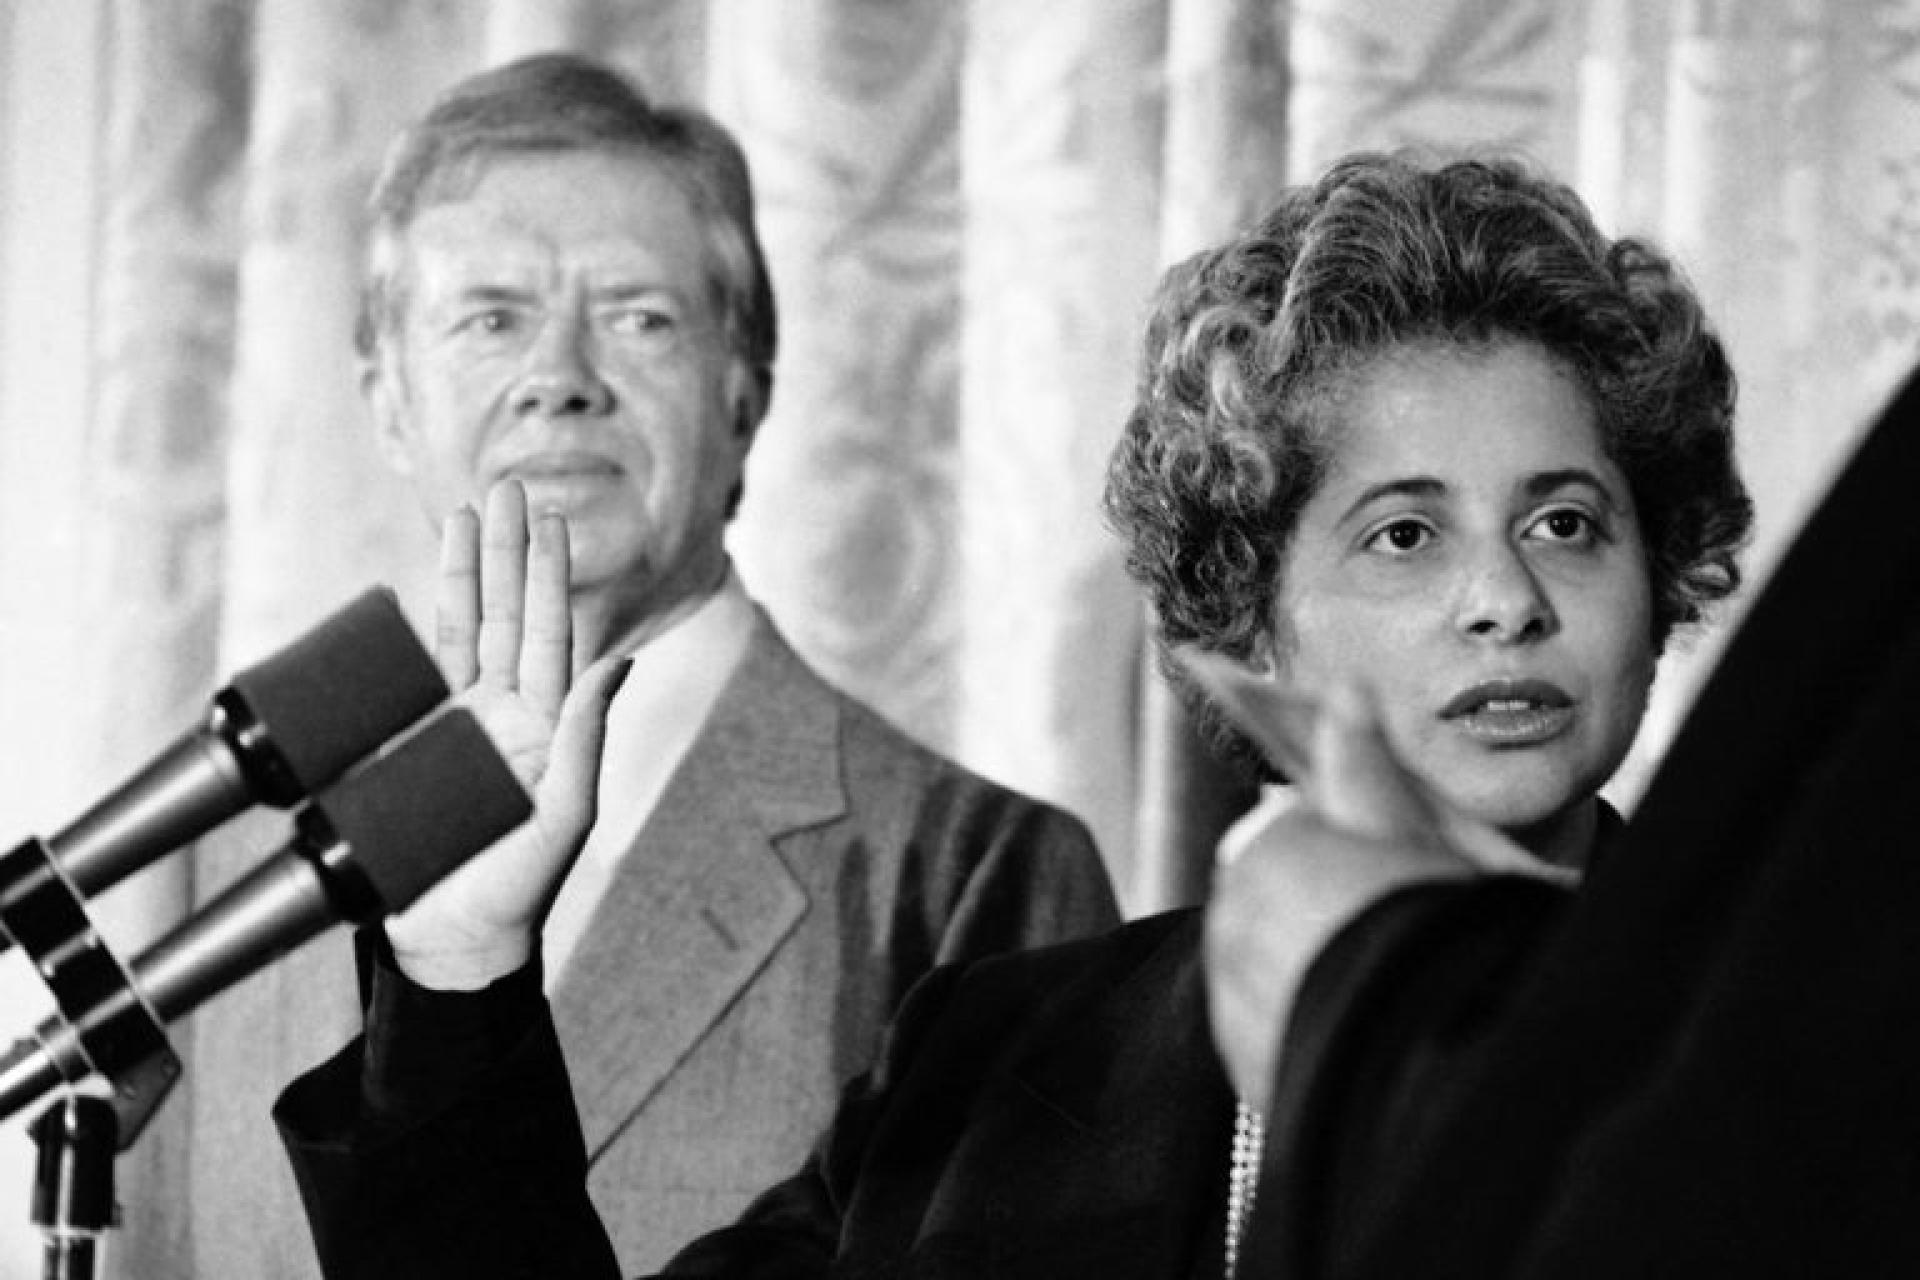 Patricia Roberts Harris (B.A. ’45) is sworn in as former President Jimmy Carter’s Secretary of the Department of Housing and Urban Development. With this appointment, Roberts Harris became the first Black woman to hold this role.